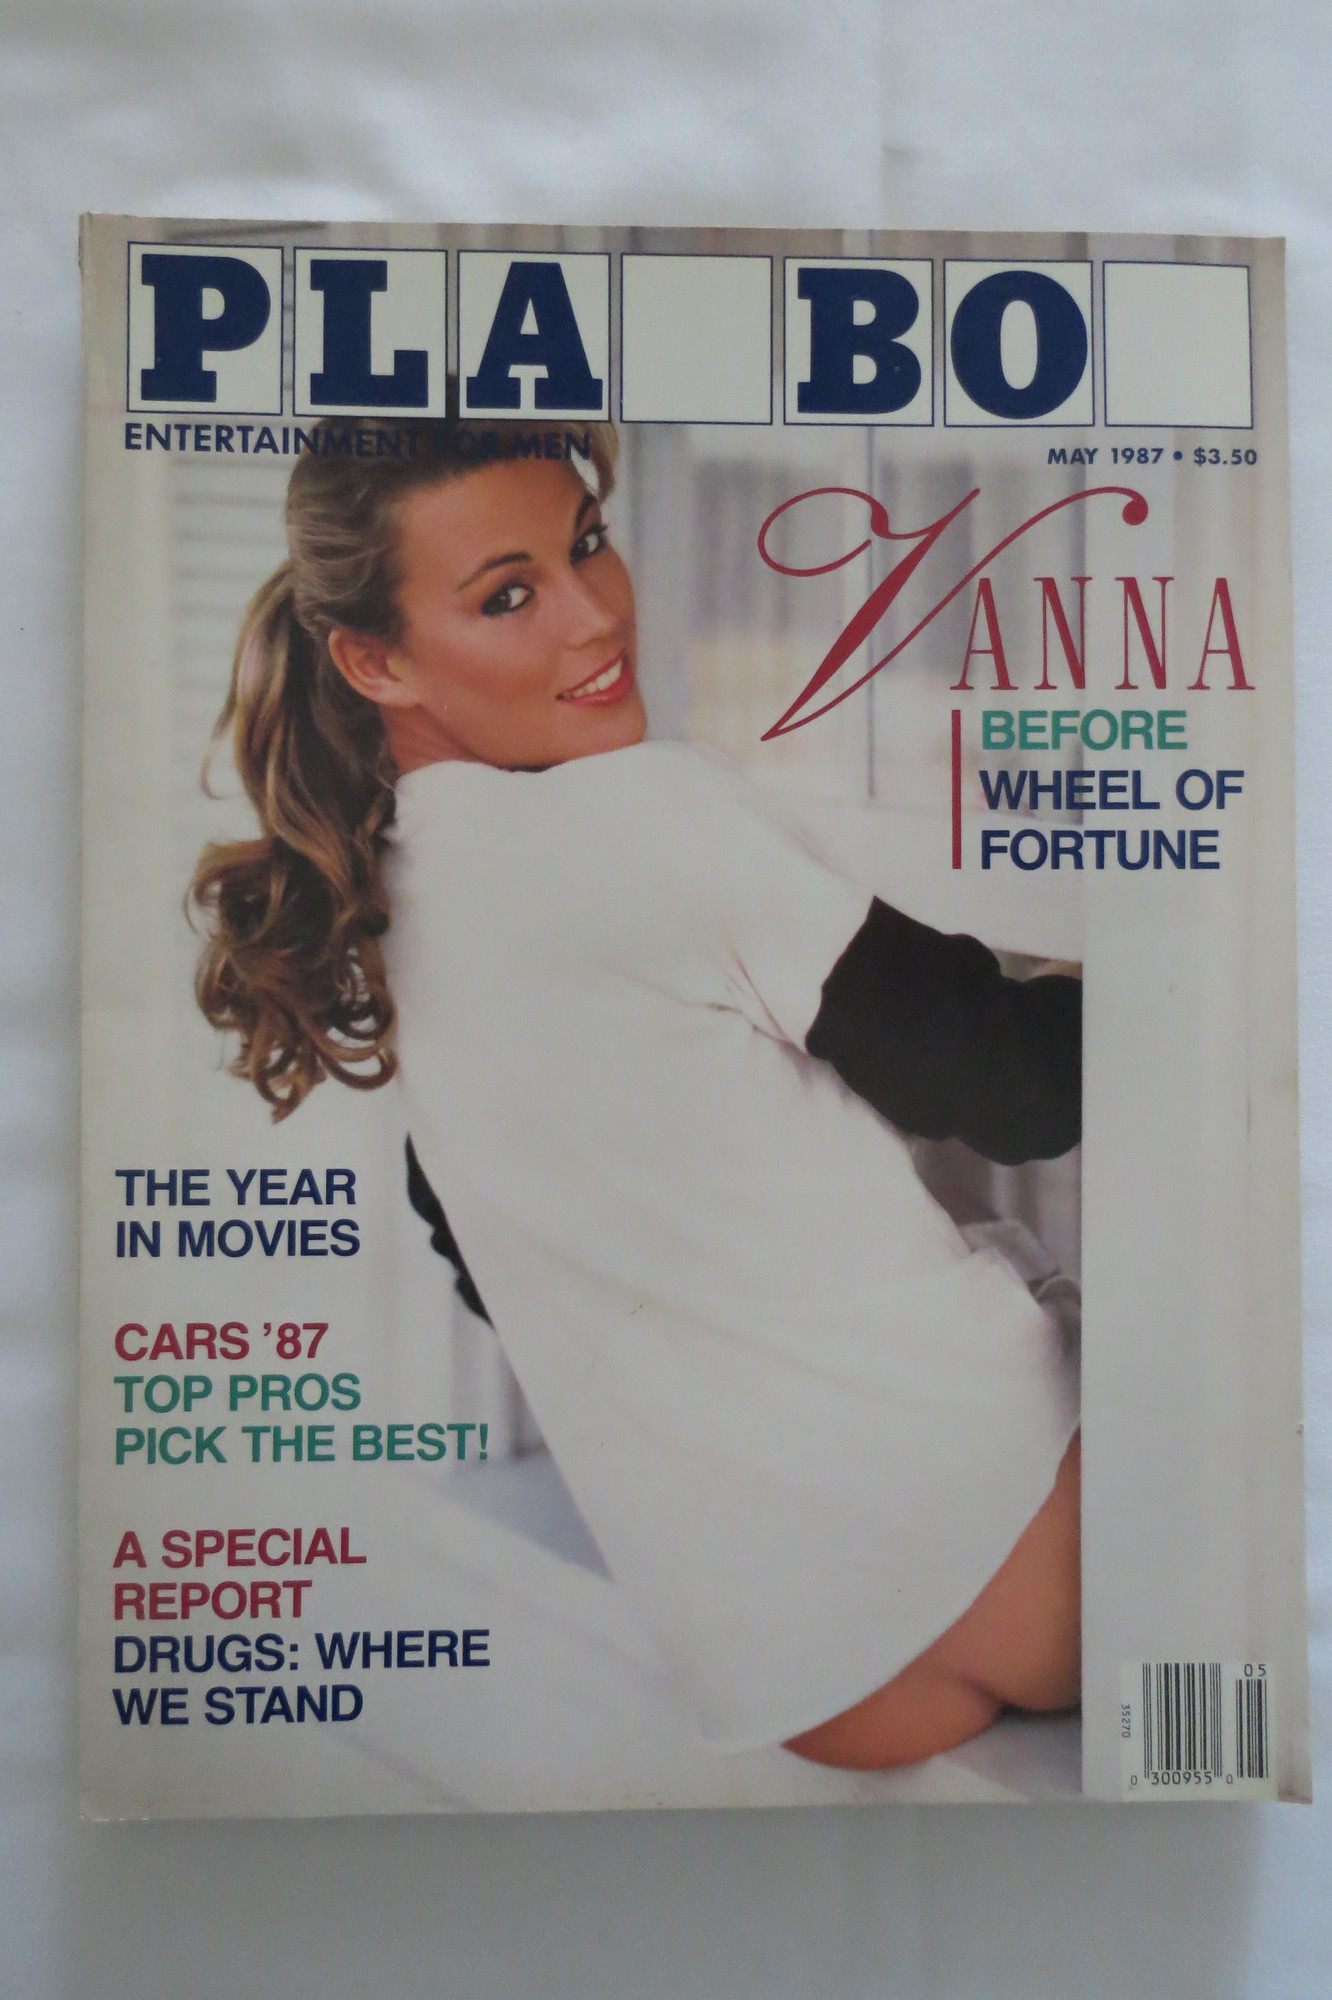 Was vanna white ever in playboy